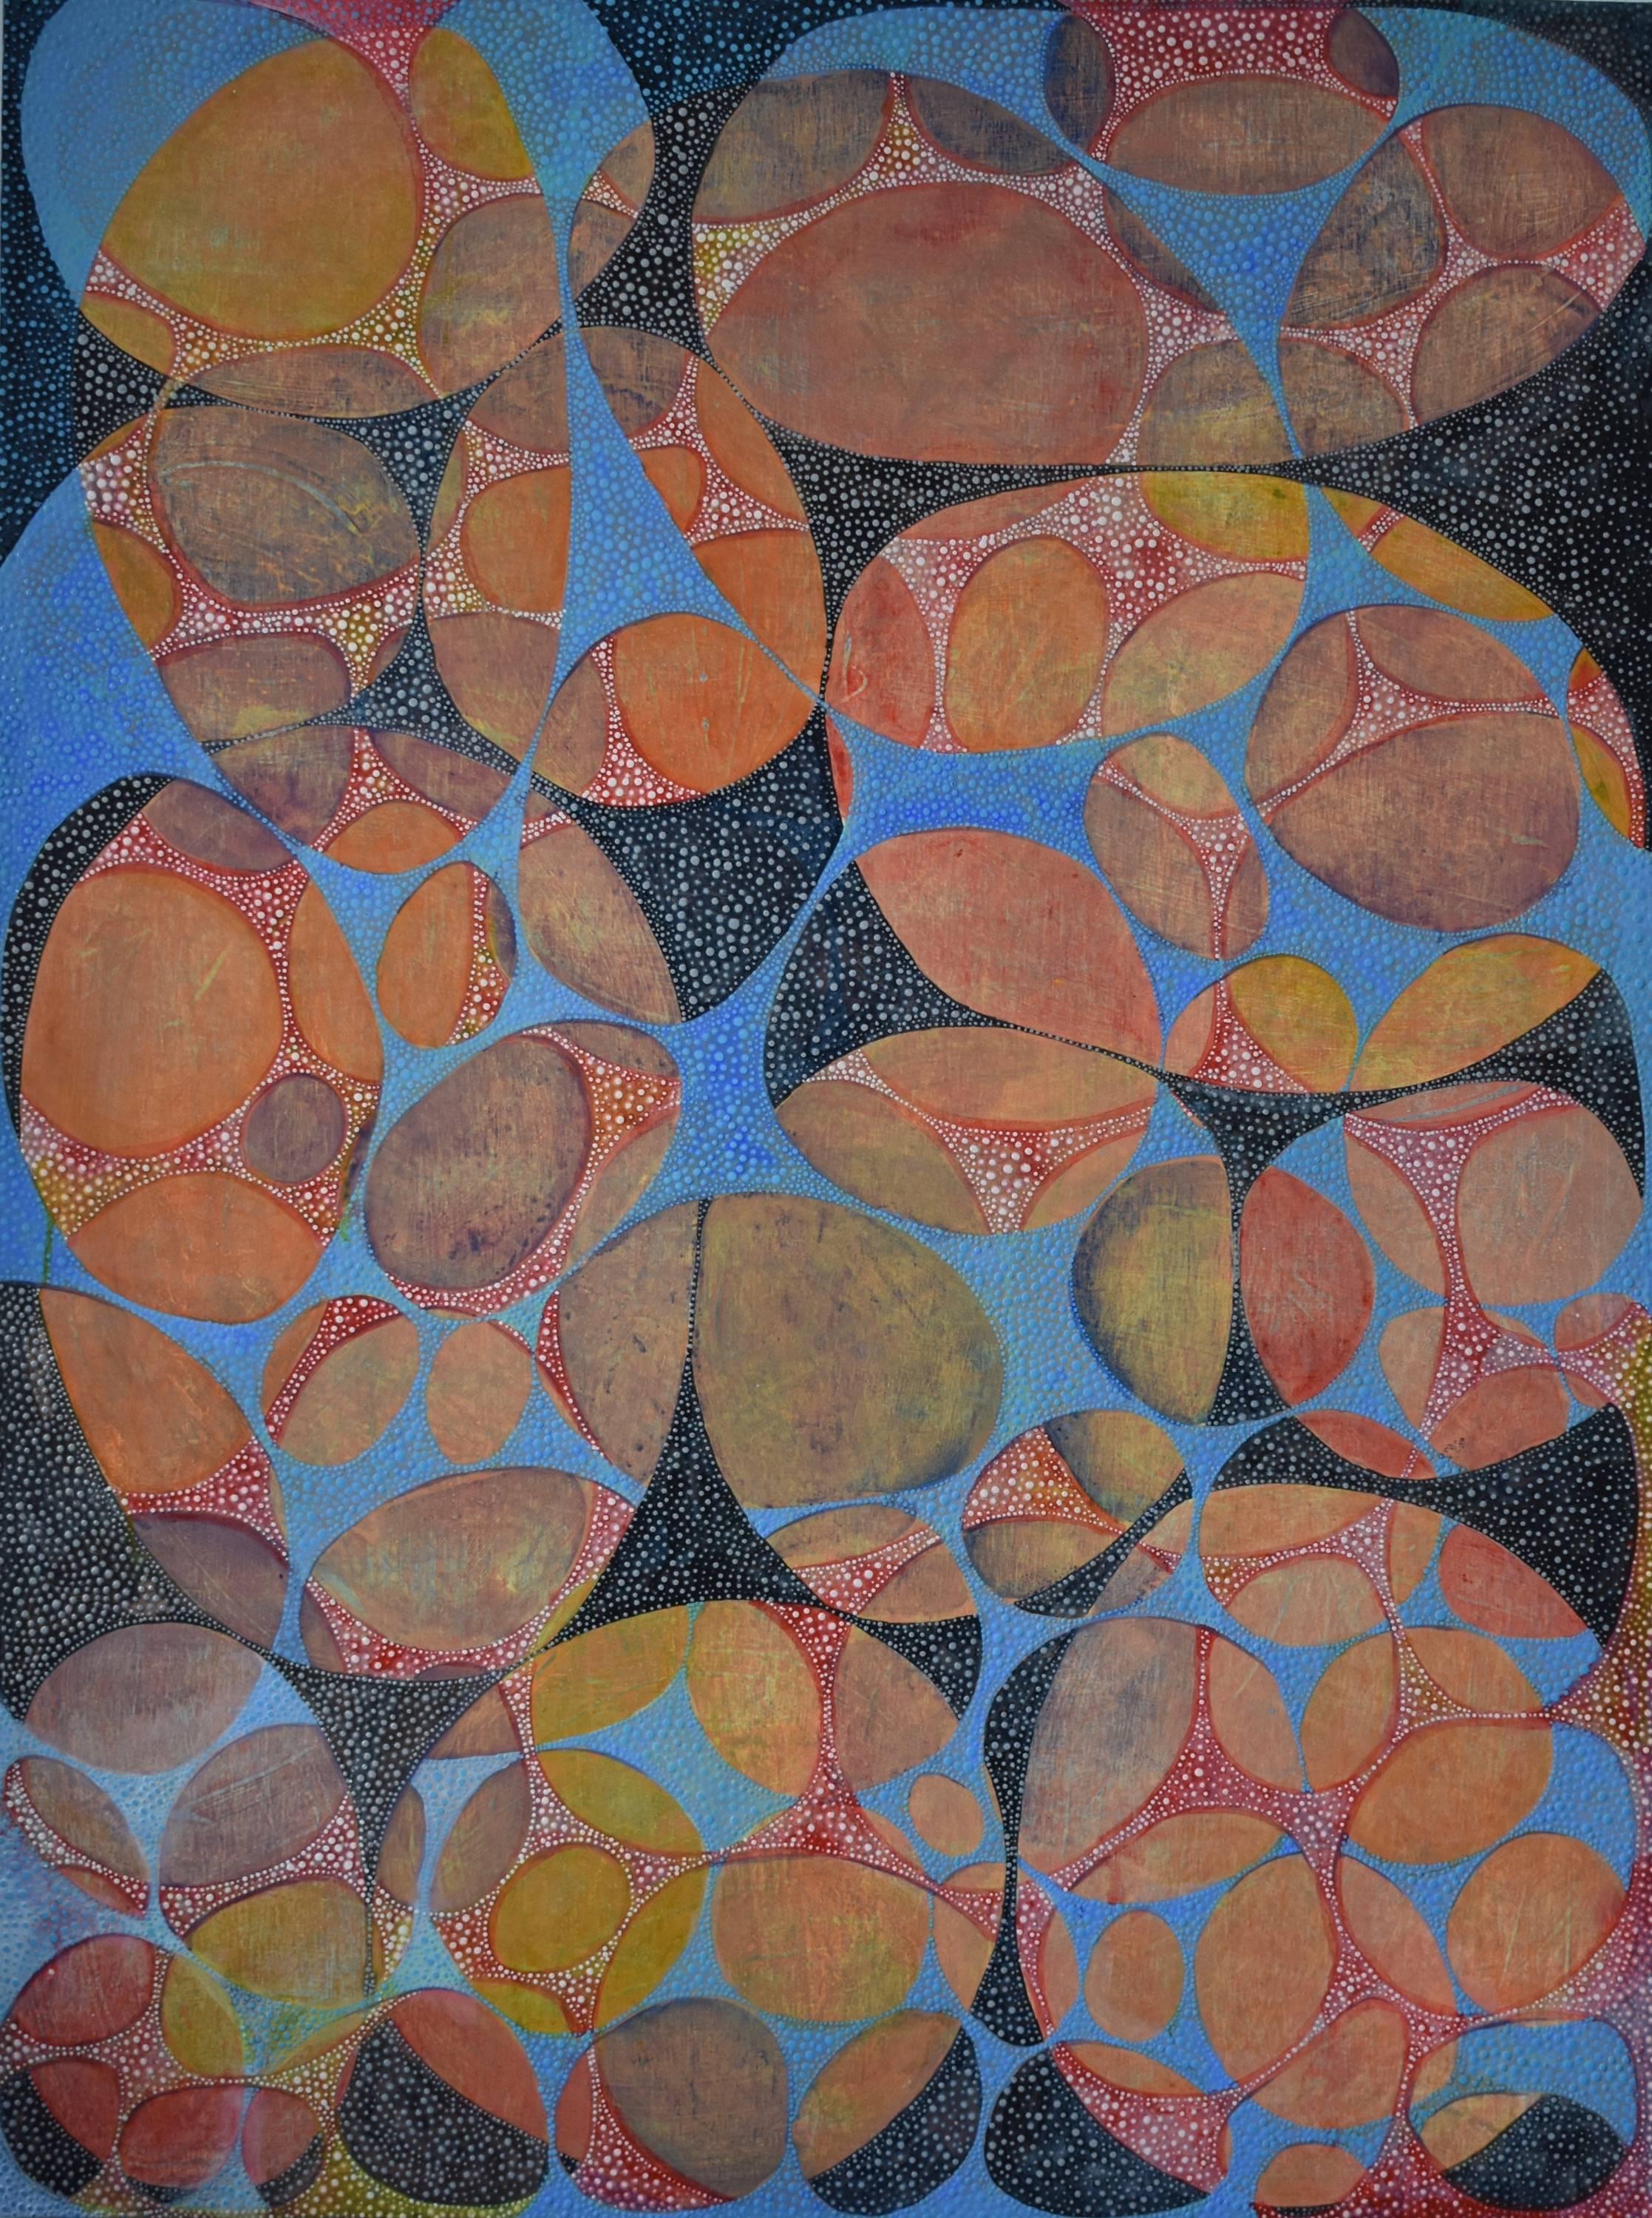 "Between 8", abstract, multicolored, webs, orange, blue, black, acrylic painting - Painting by Denise Driscoll